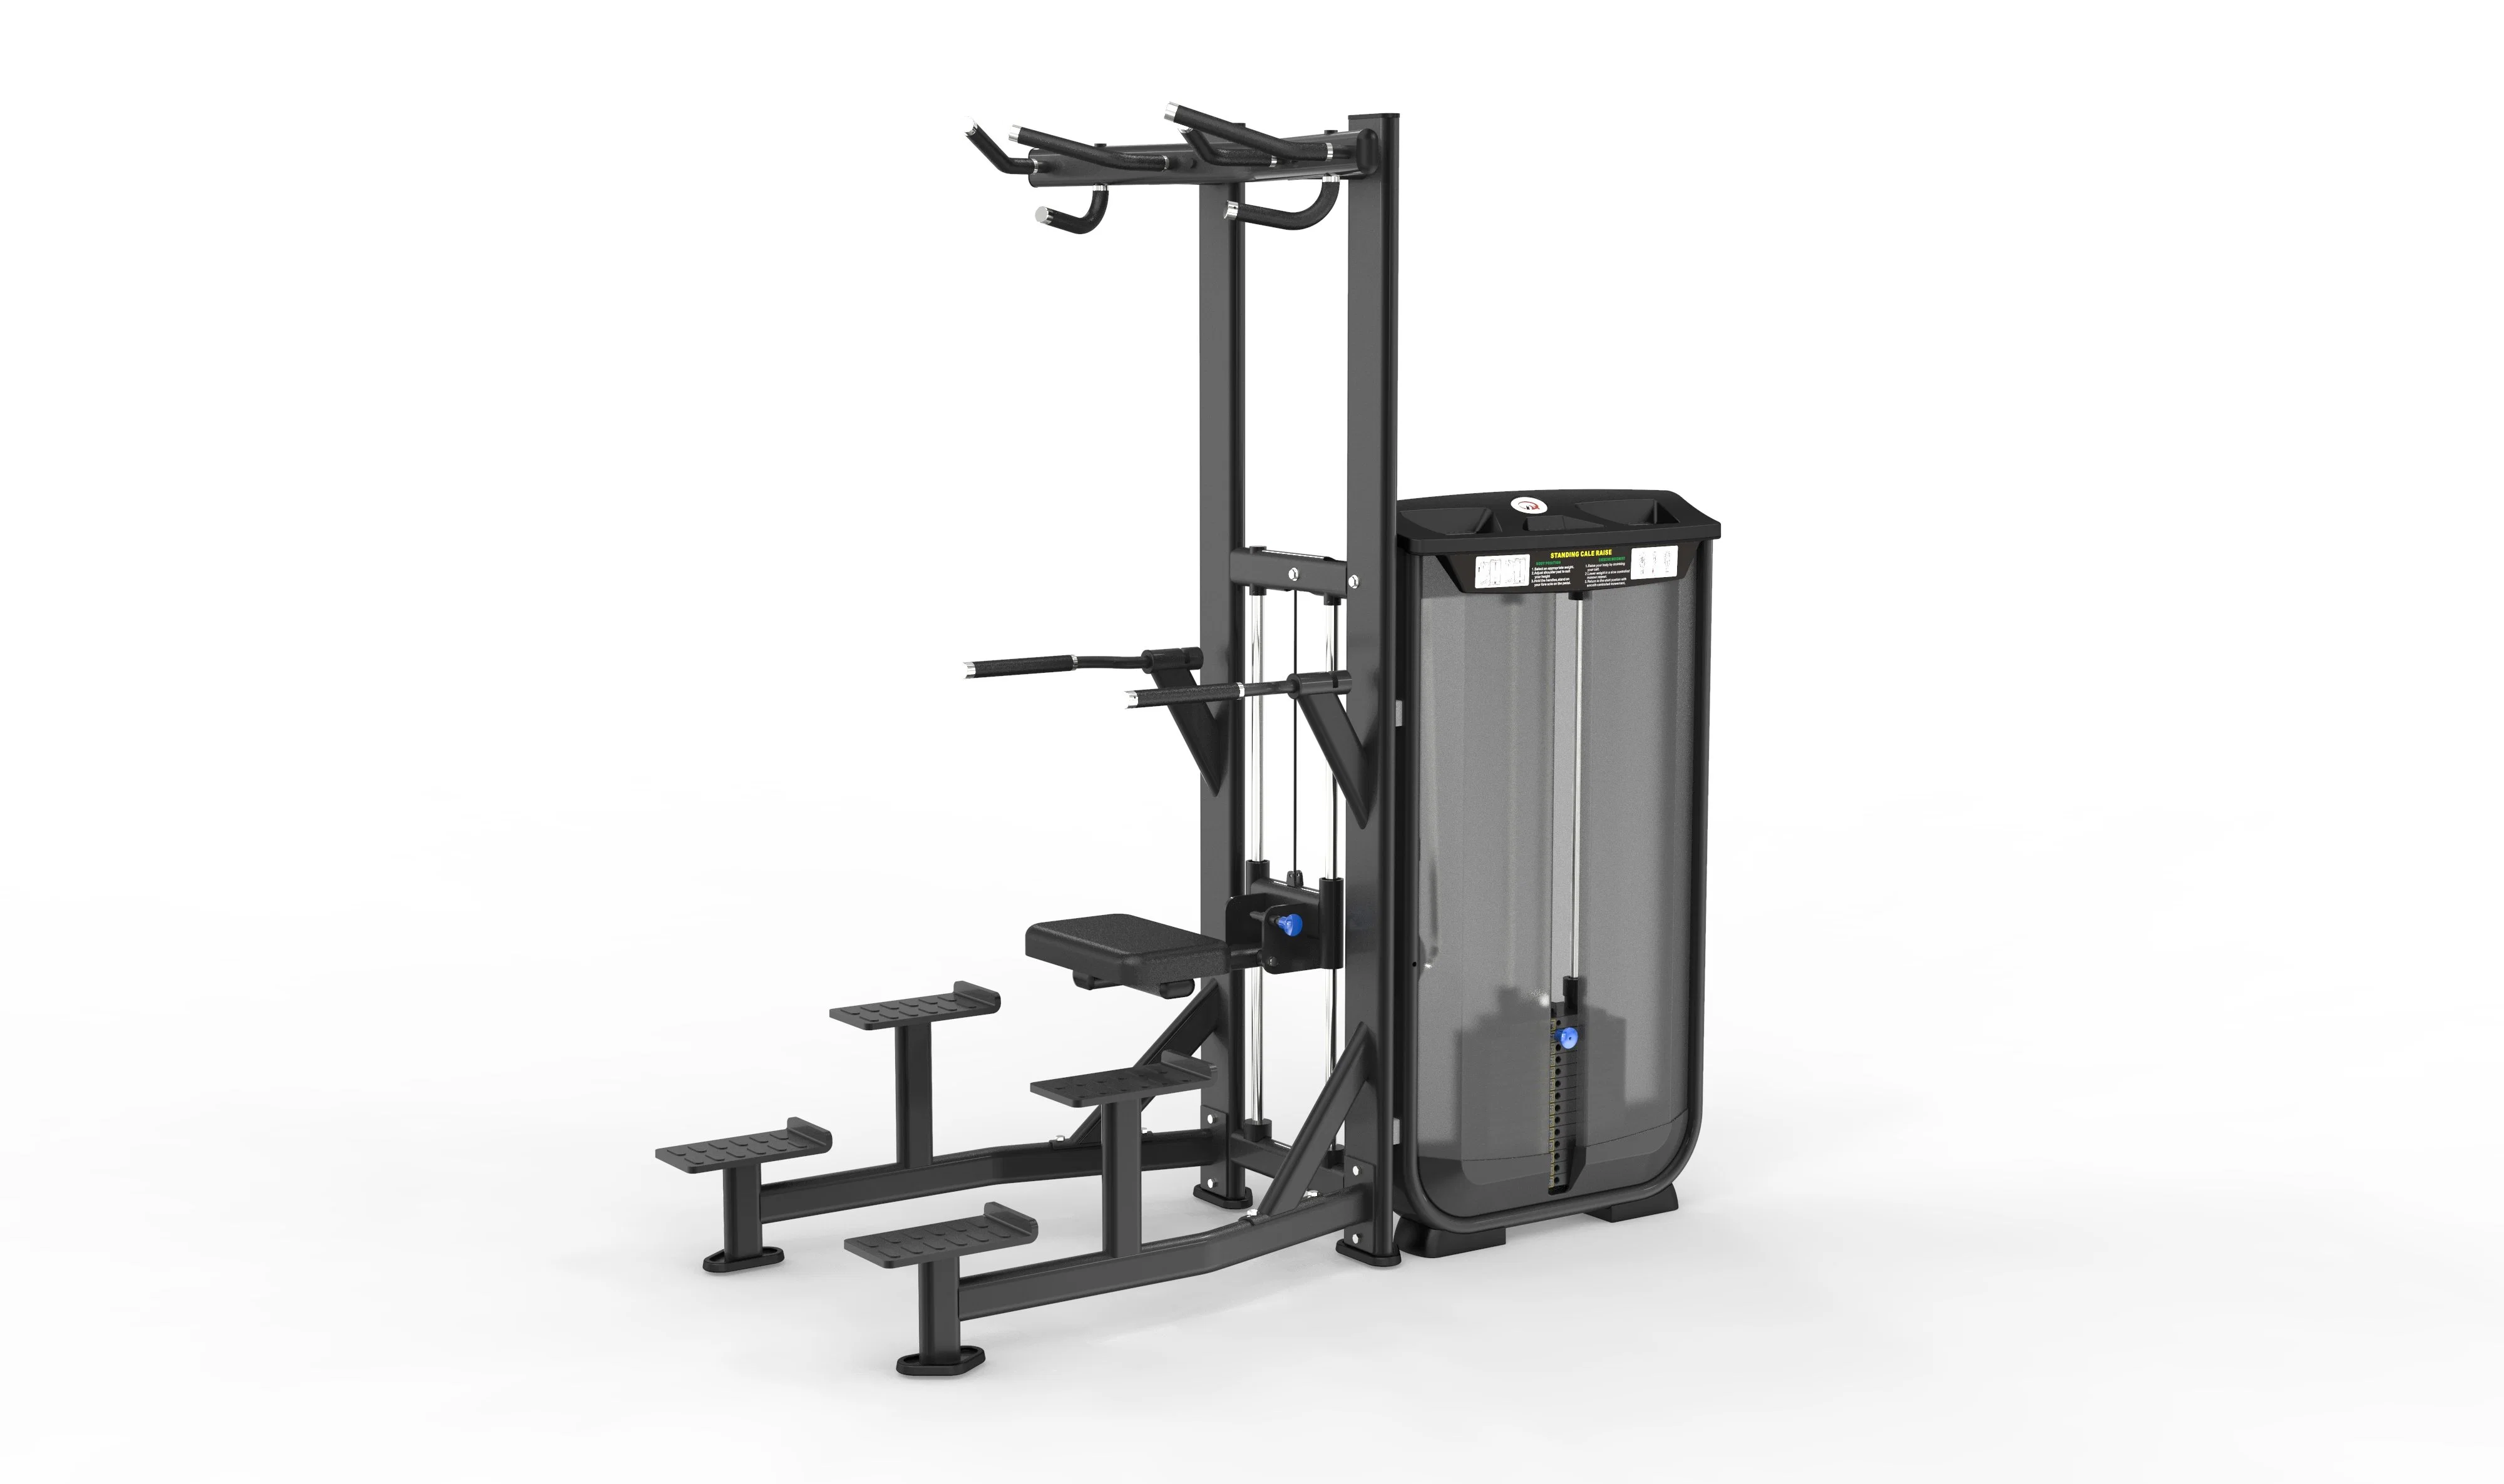 Professional Commercial Strength Equipment Body Building Pin Loaded Exercise Indoor Home Gym Sports Machine Assist DIP Chin Commercial Gym Fitness Equipment